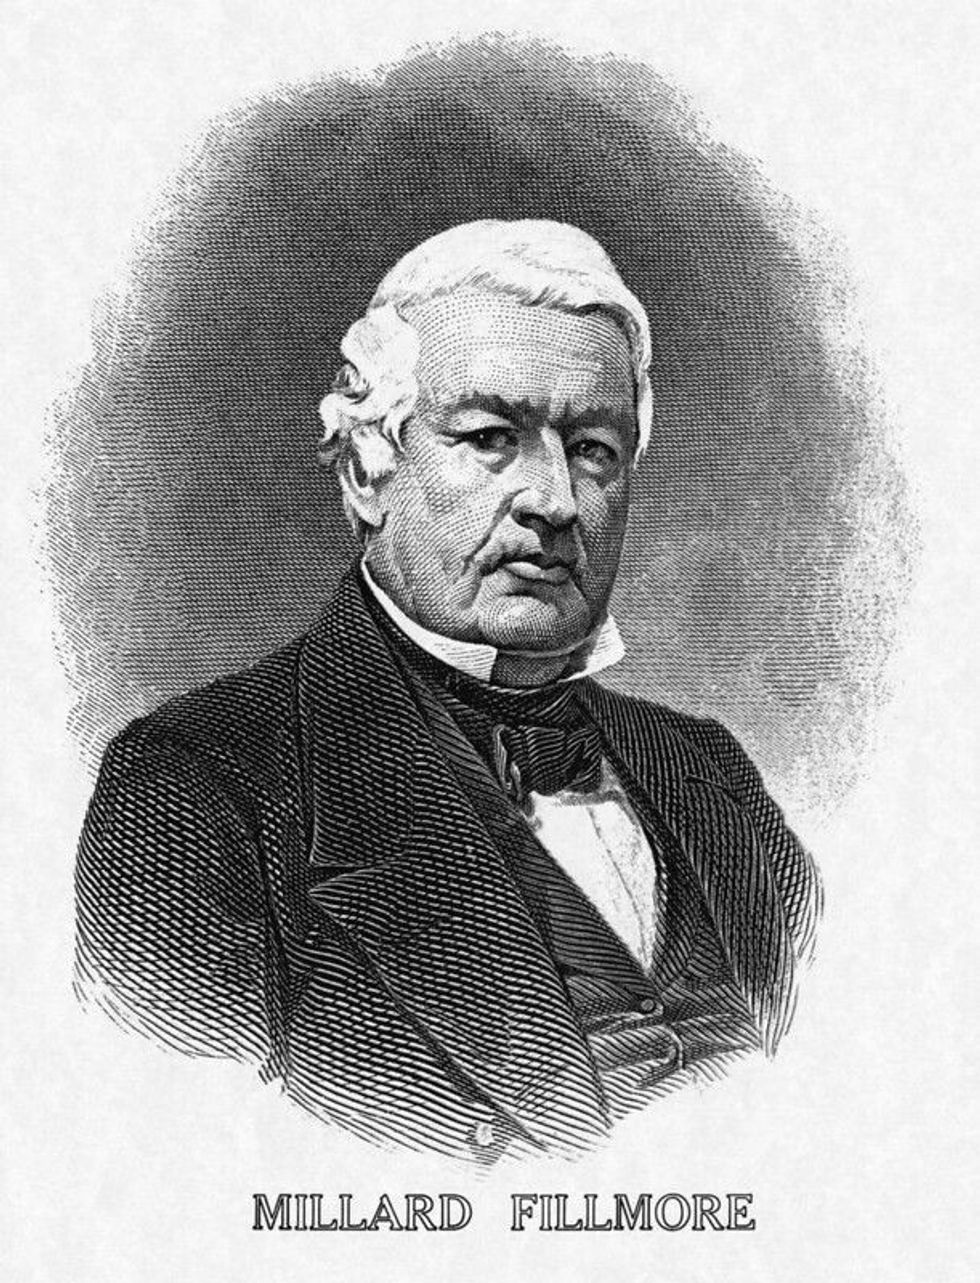 Learn some super impressive Millard Fillmore facts with us and understand his views regarding progress, presidency, and more!